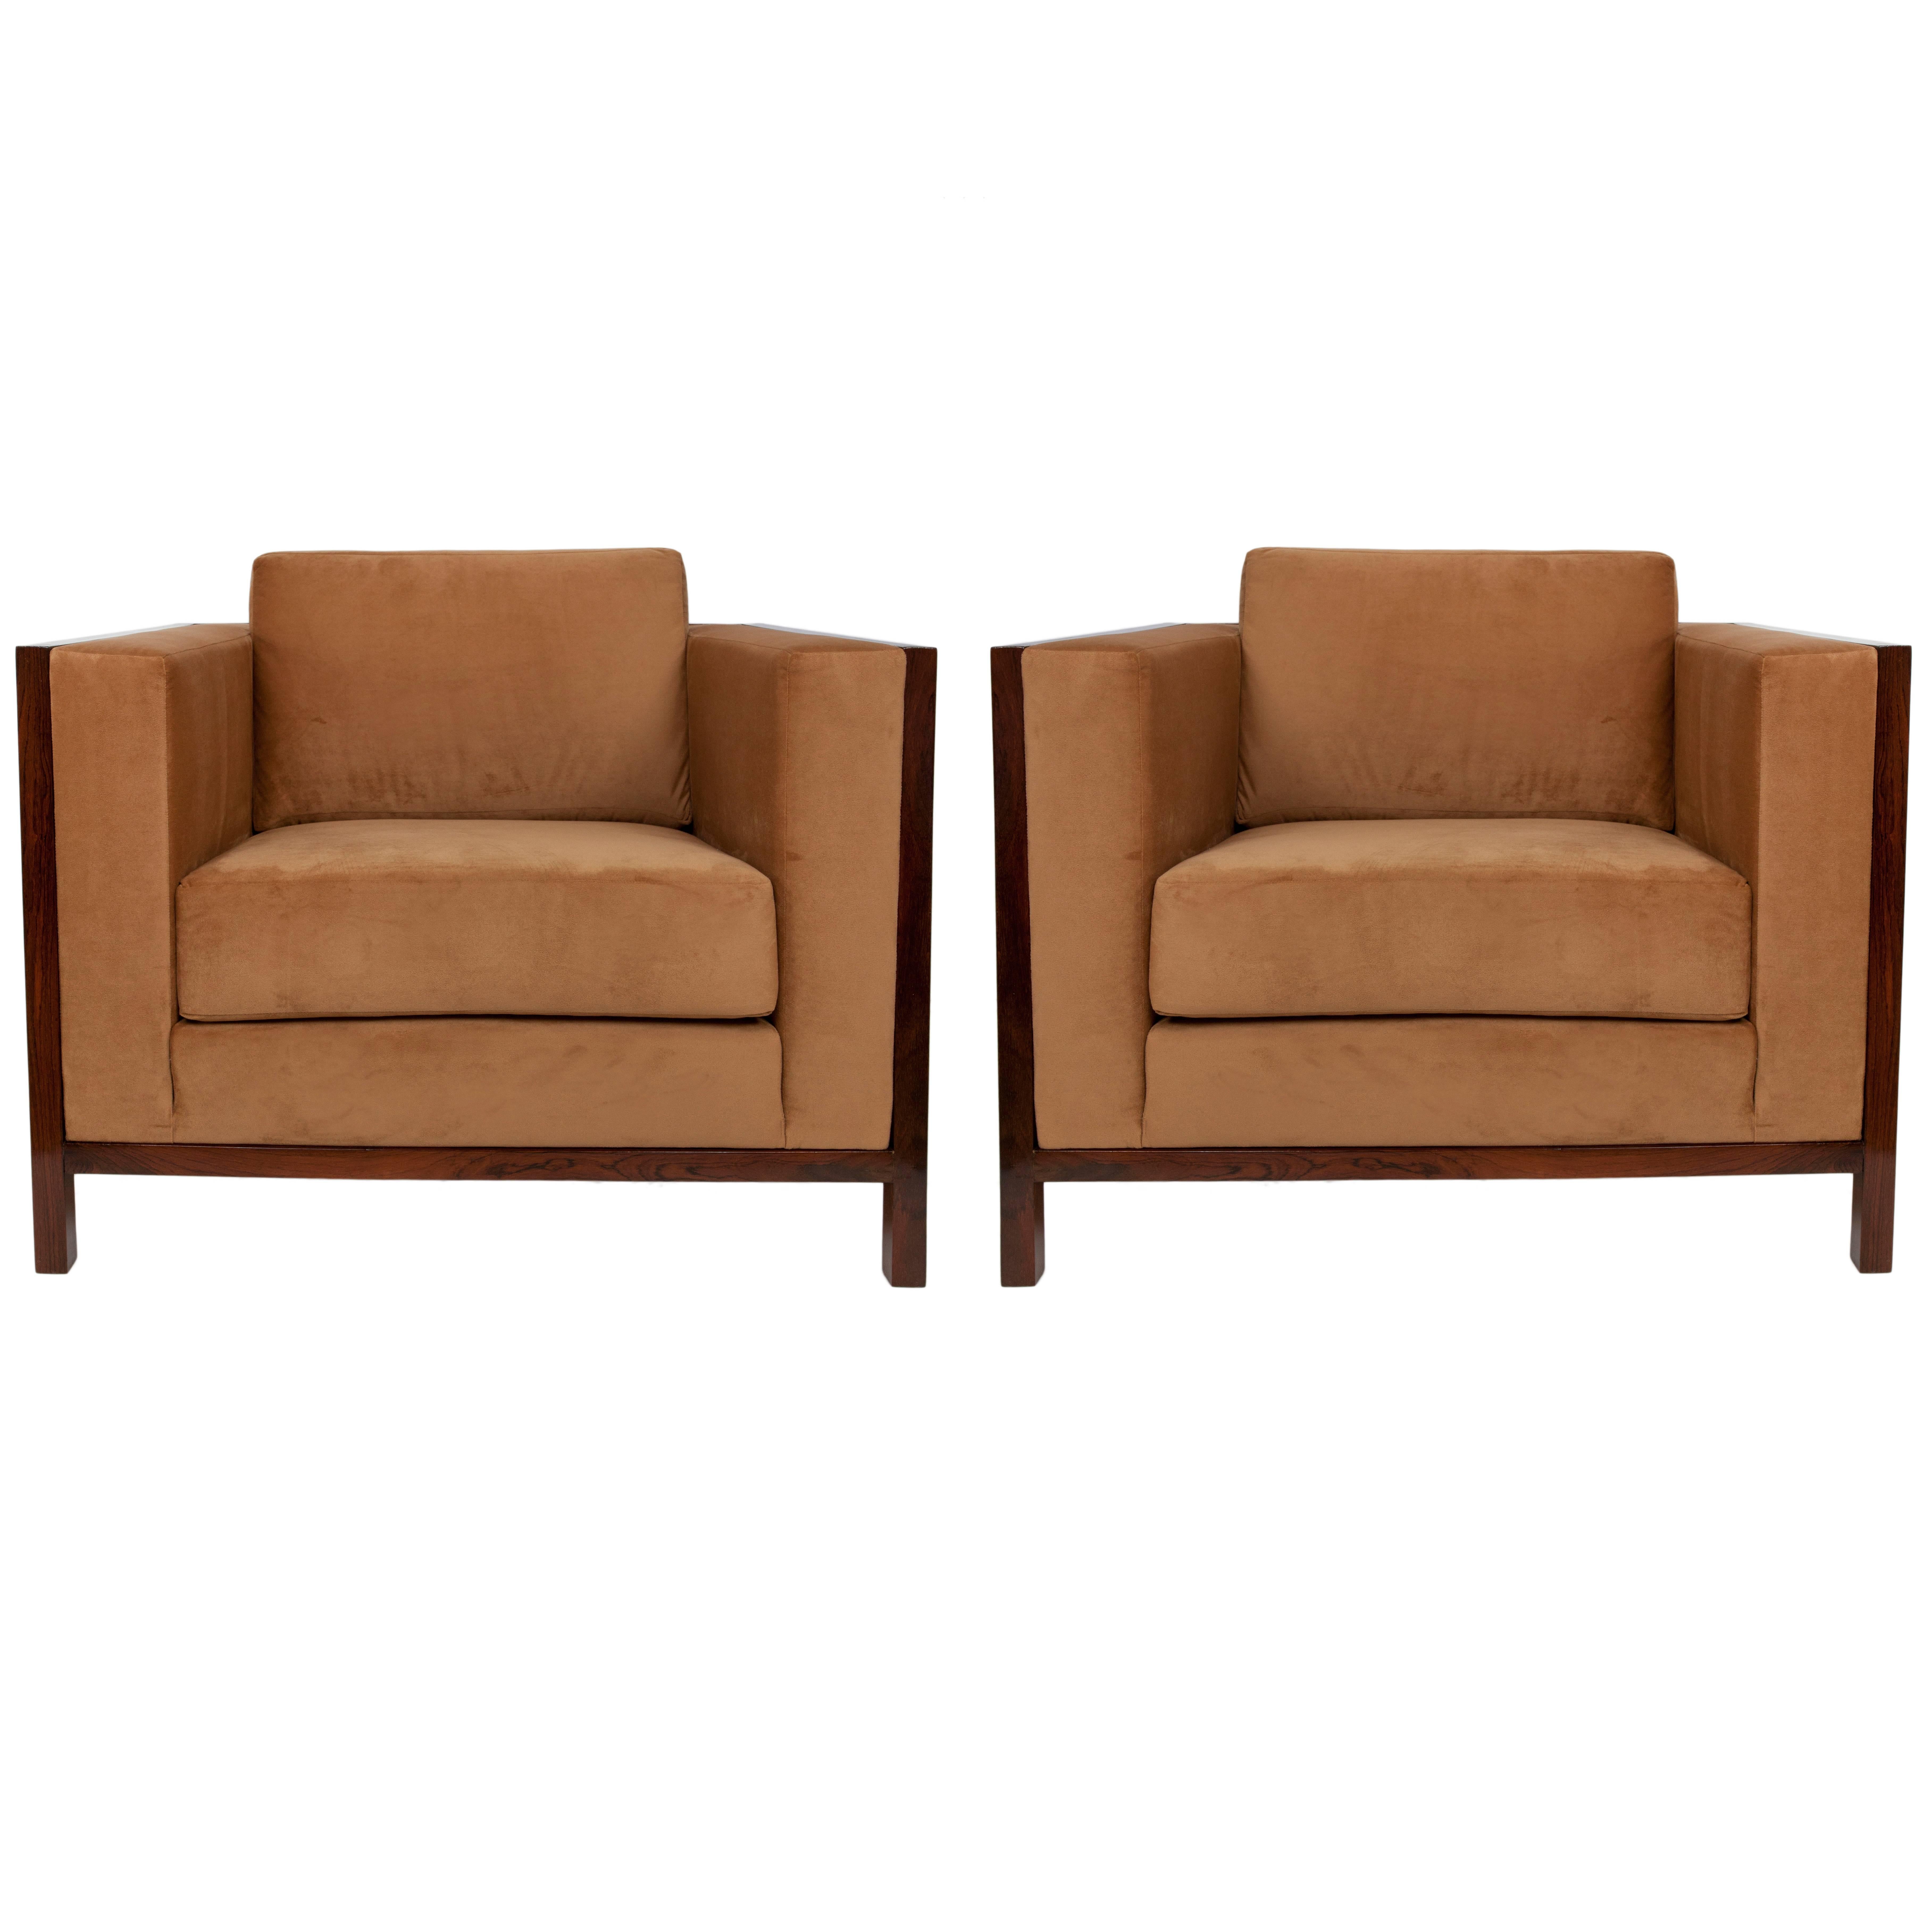 A pair of armchairs, manufactured circa 1960s, each upholstered in camel colored velvet against Brazilian jacaranda wood frames. Very good vintage condition, recently reupholstered.

10842